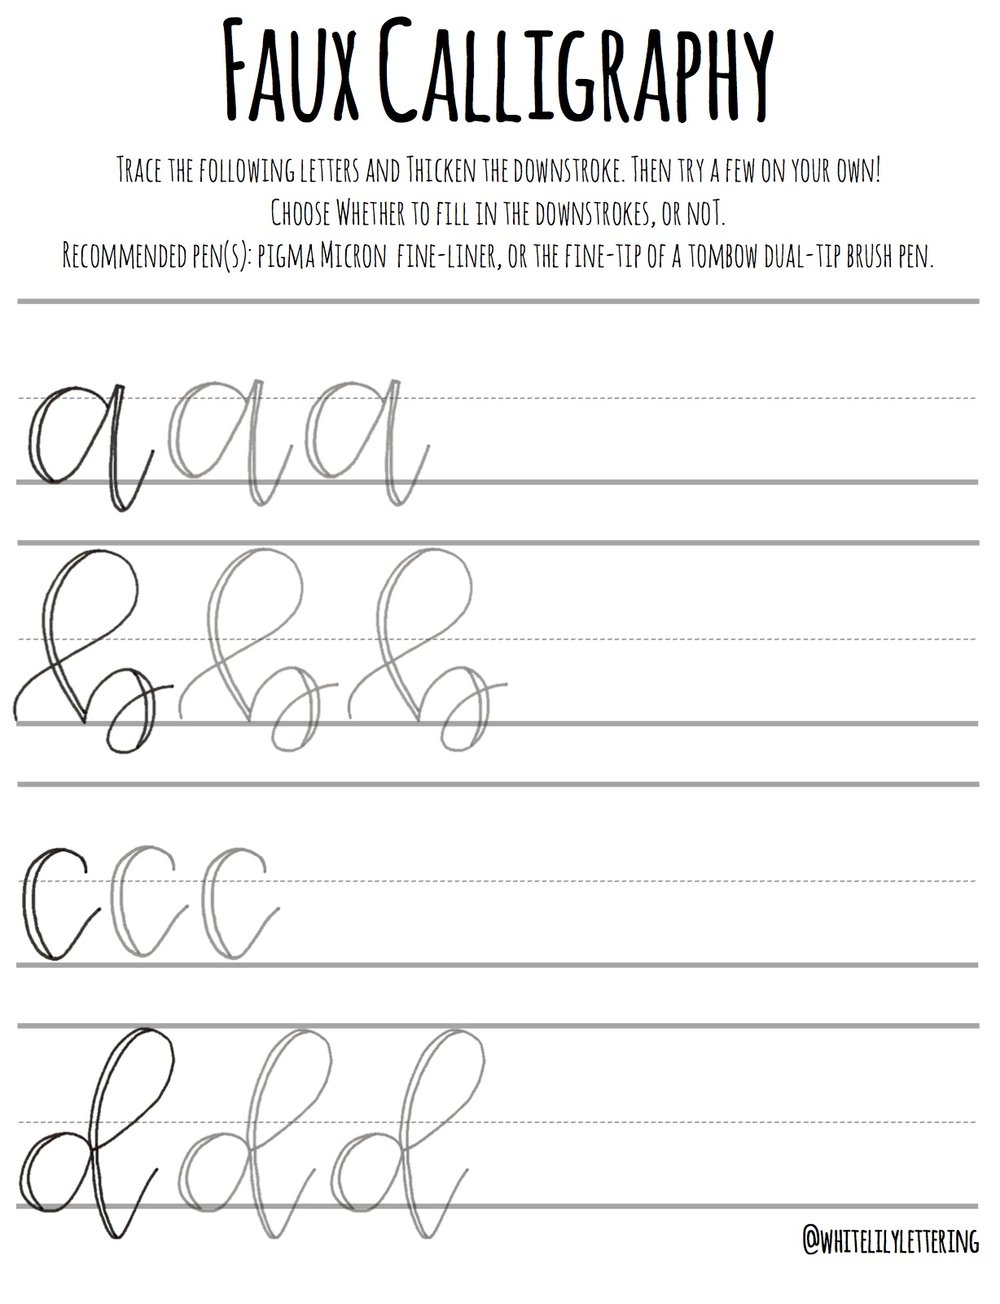 Printable Faux Calligraphy Worksheets - Printable Word Searches